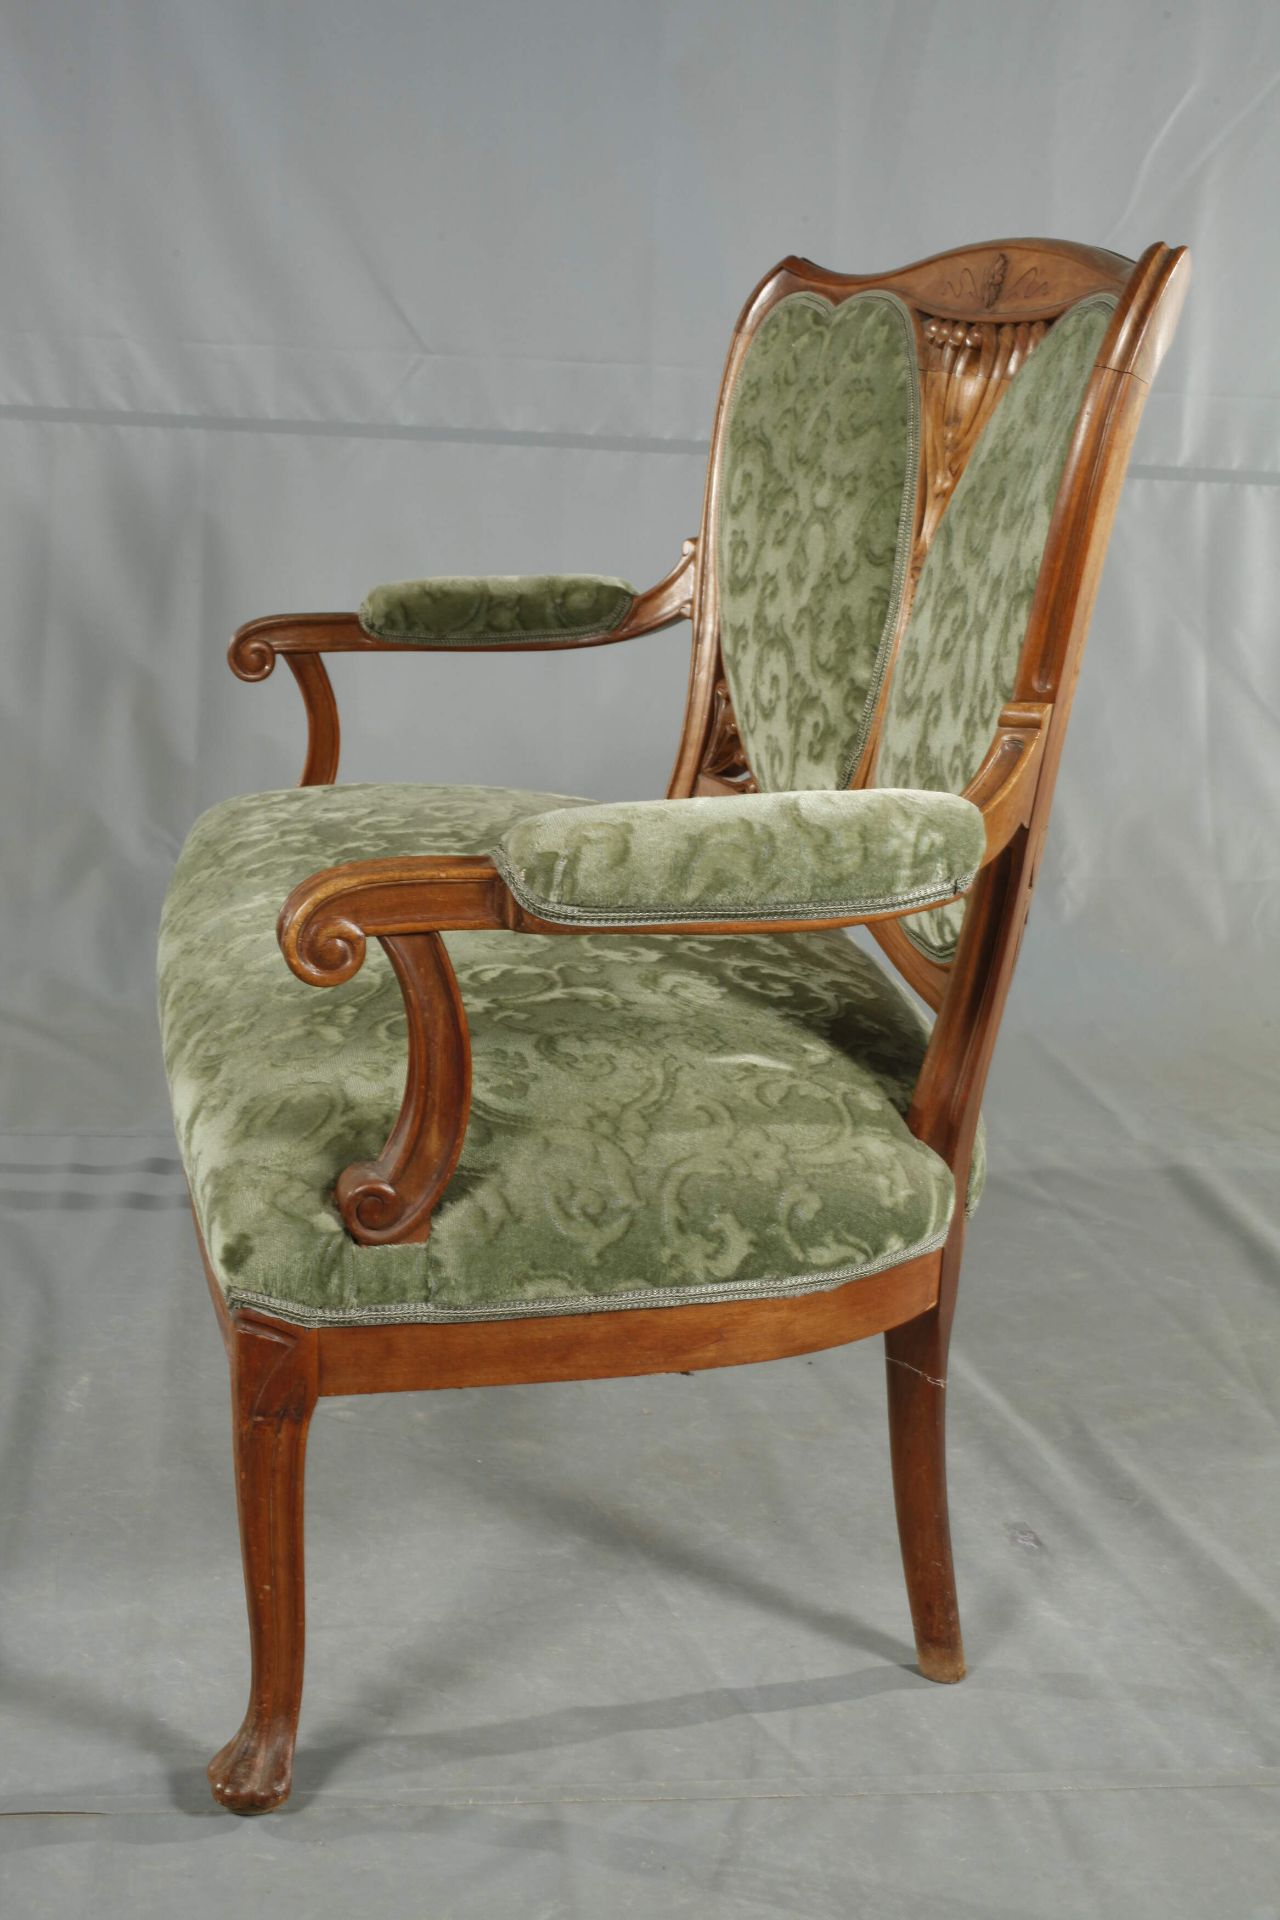 Large Art Nouveau seating group - Image 7 of 12